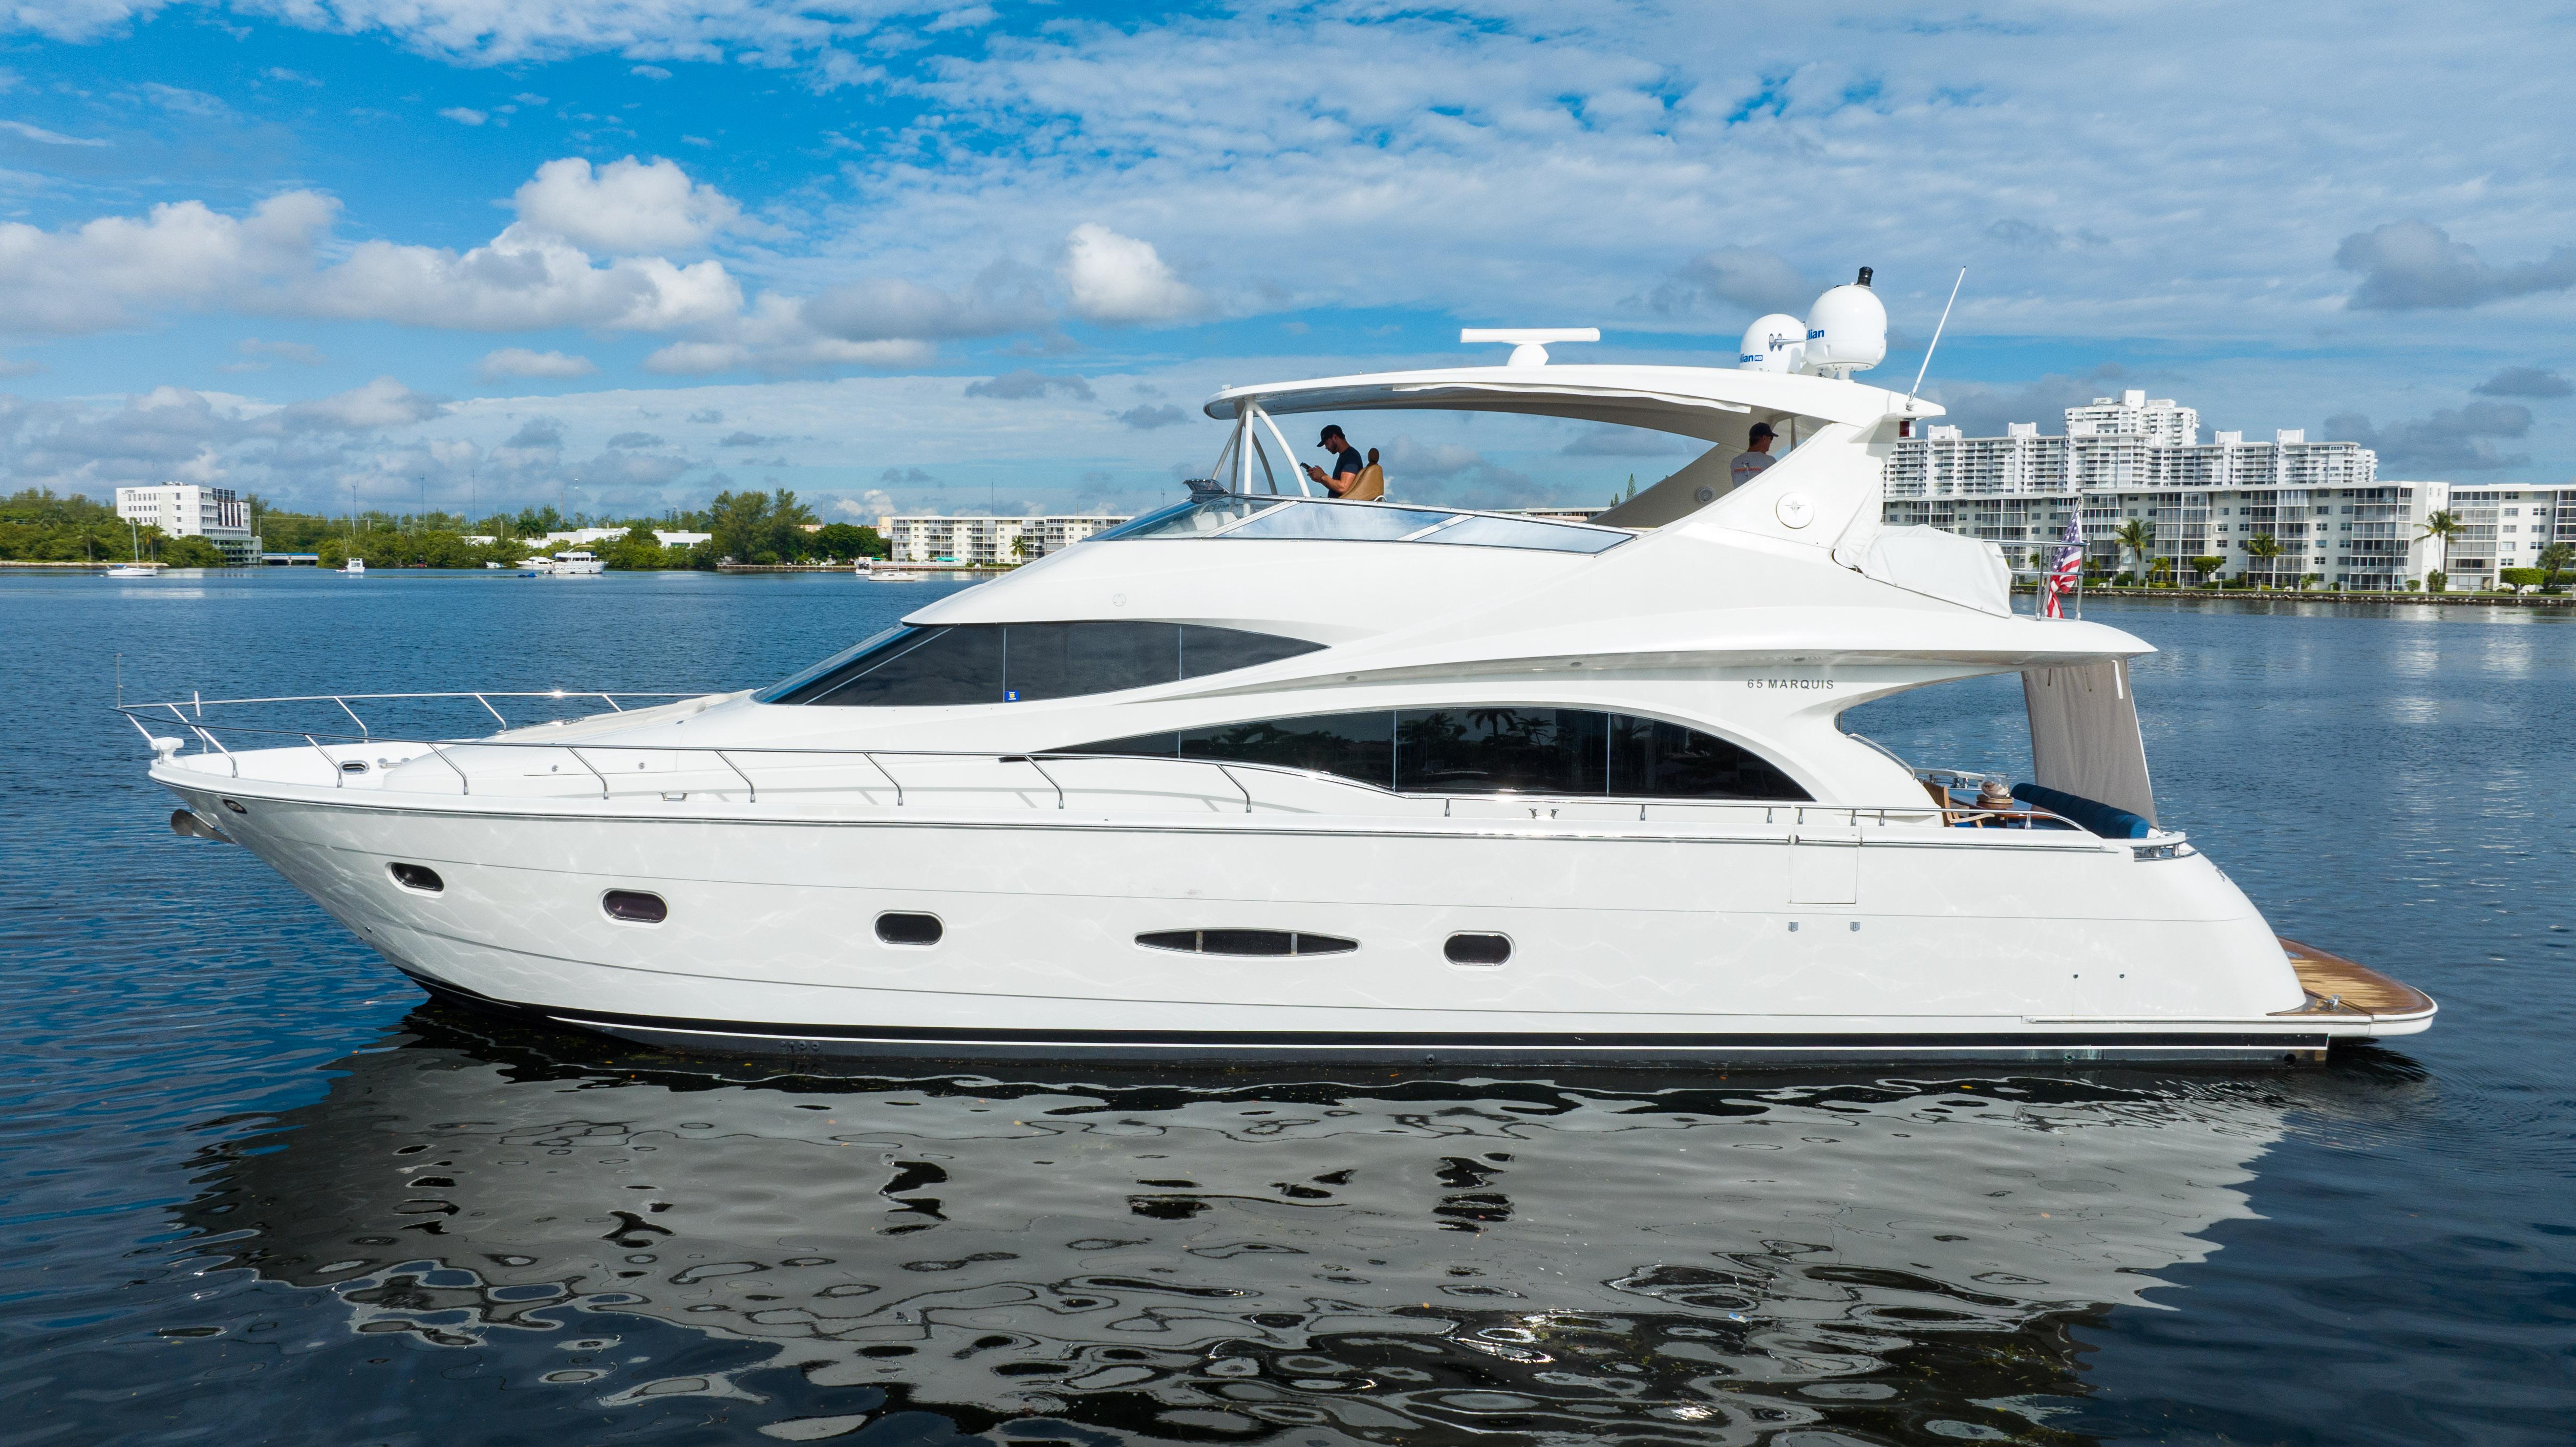 65' motor yacht for sale